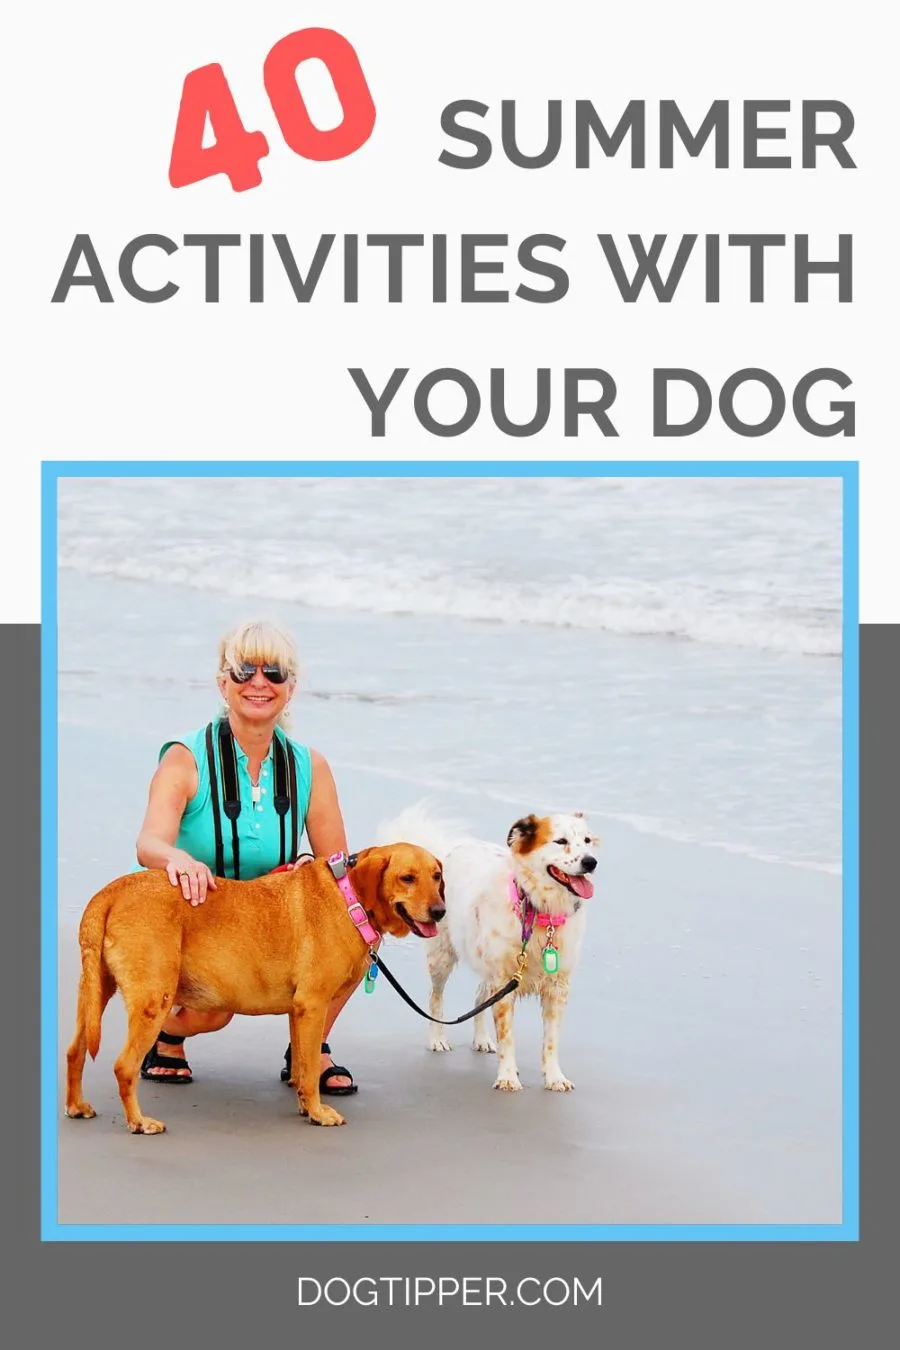 40 activities to enjoy with your dog this summer!